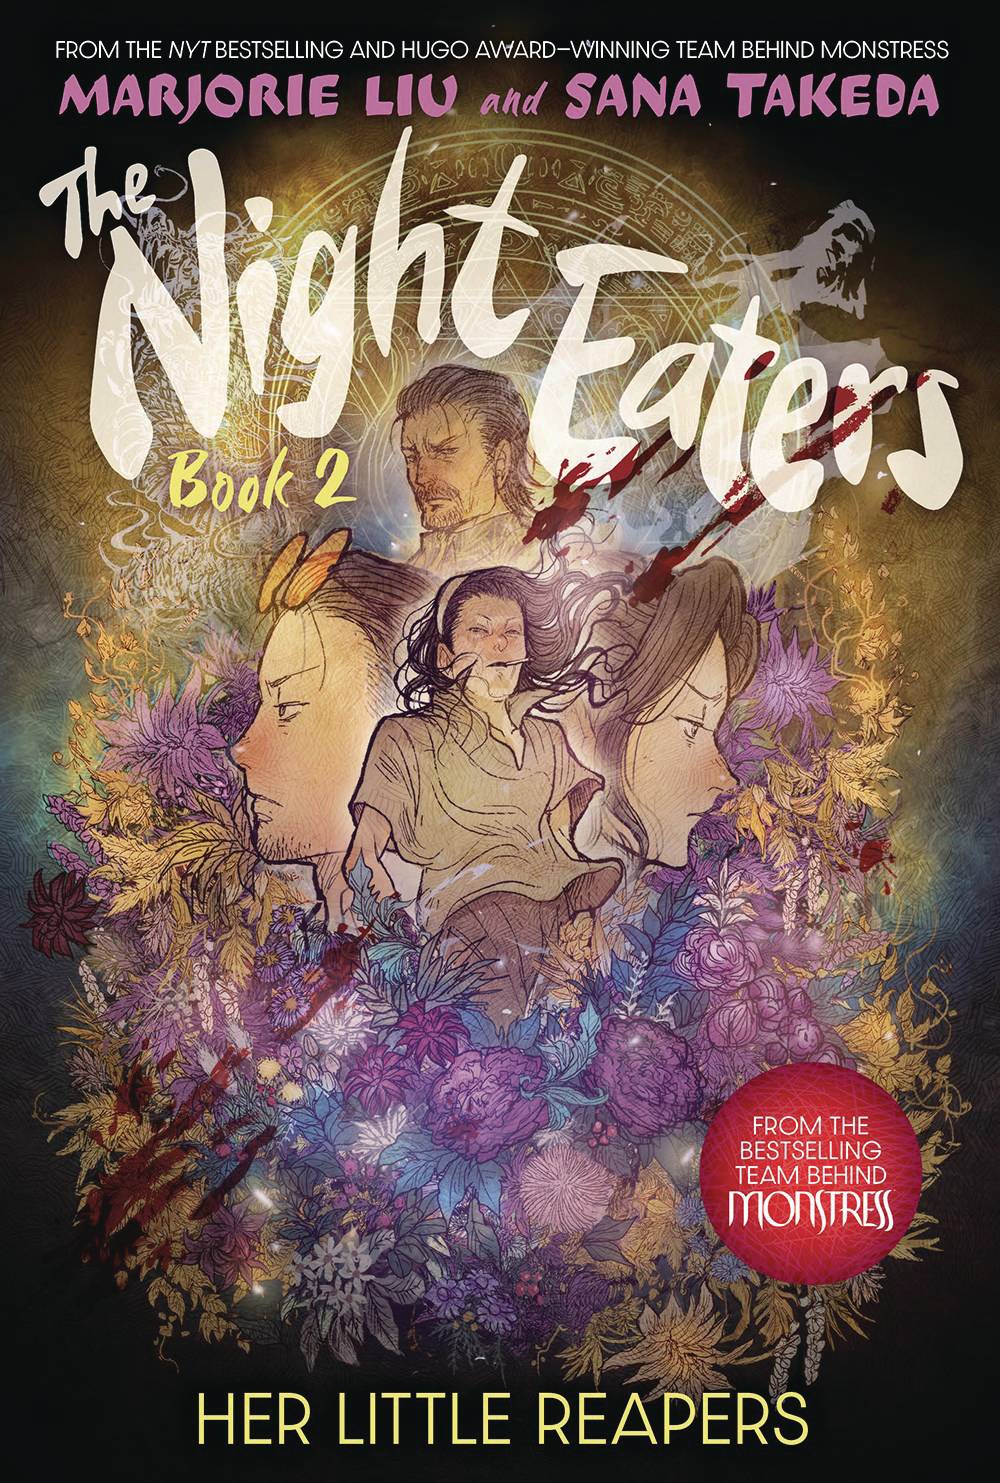 THE NIGHT EATERS VOLUME 2 from AbramsComicsArts